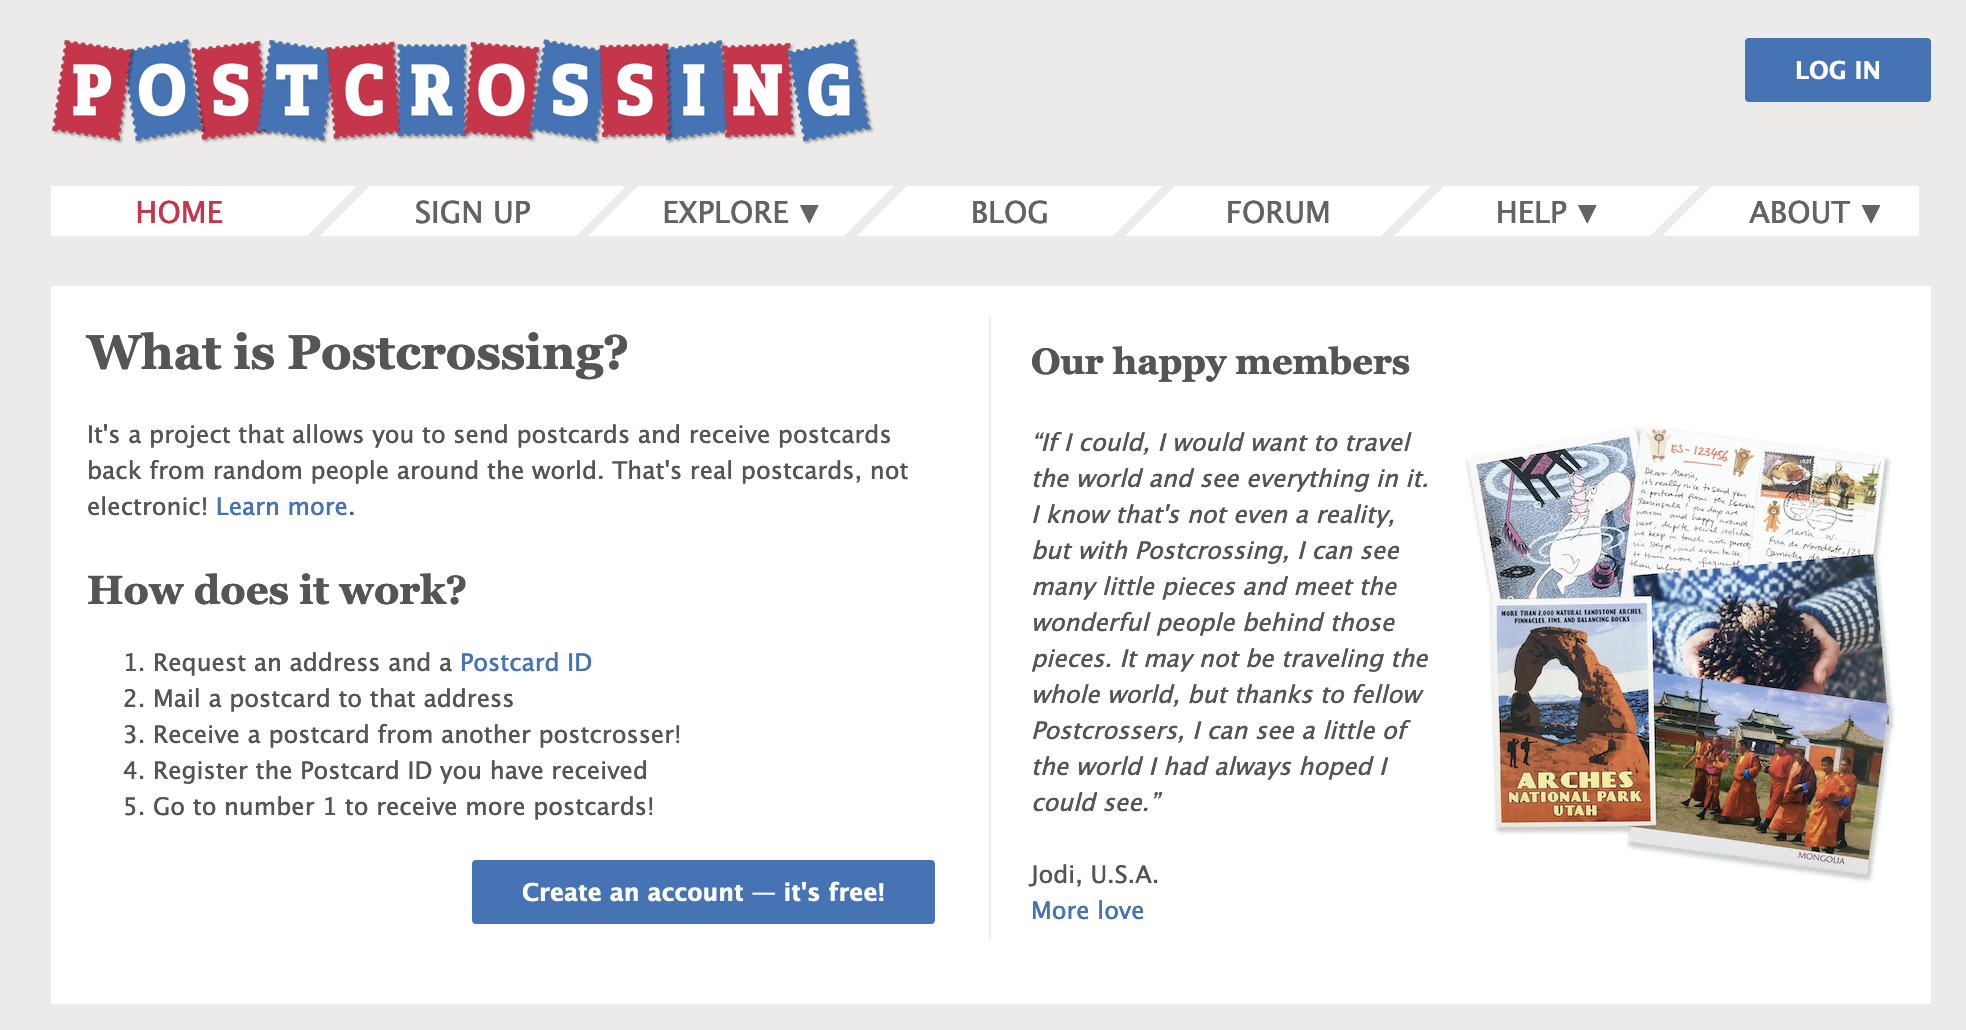 Screenshot of the Postcrossing website which describes how the service works